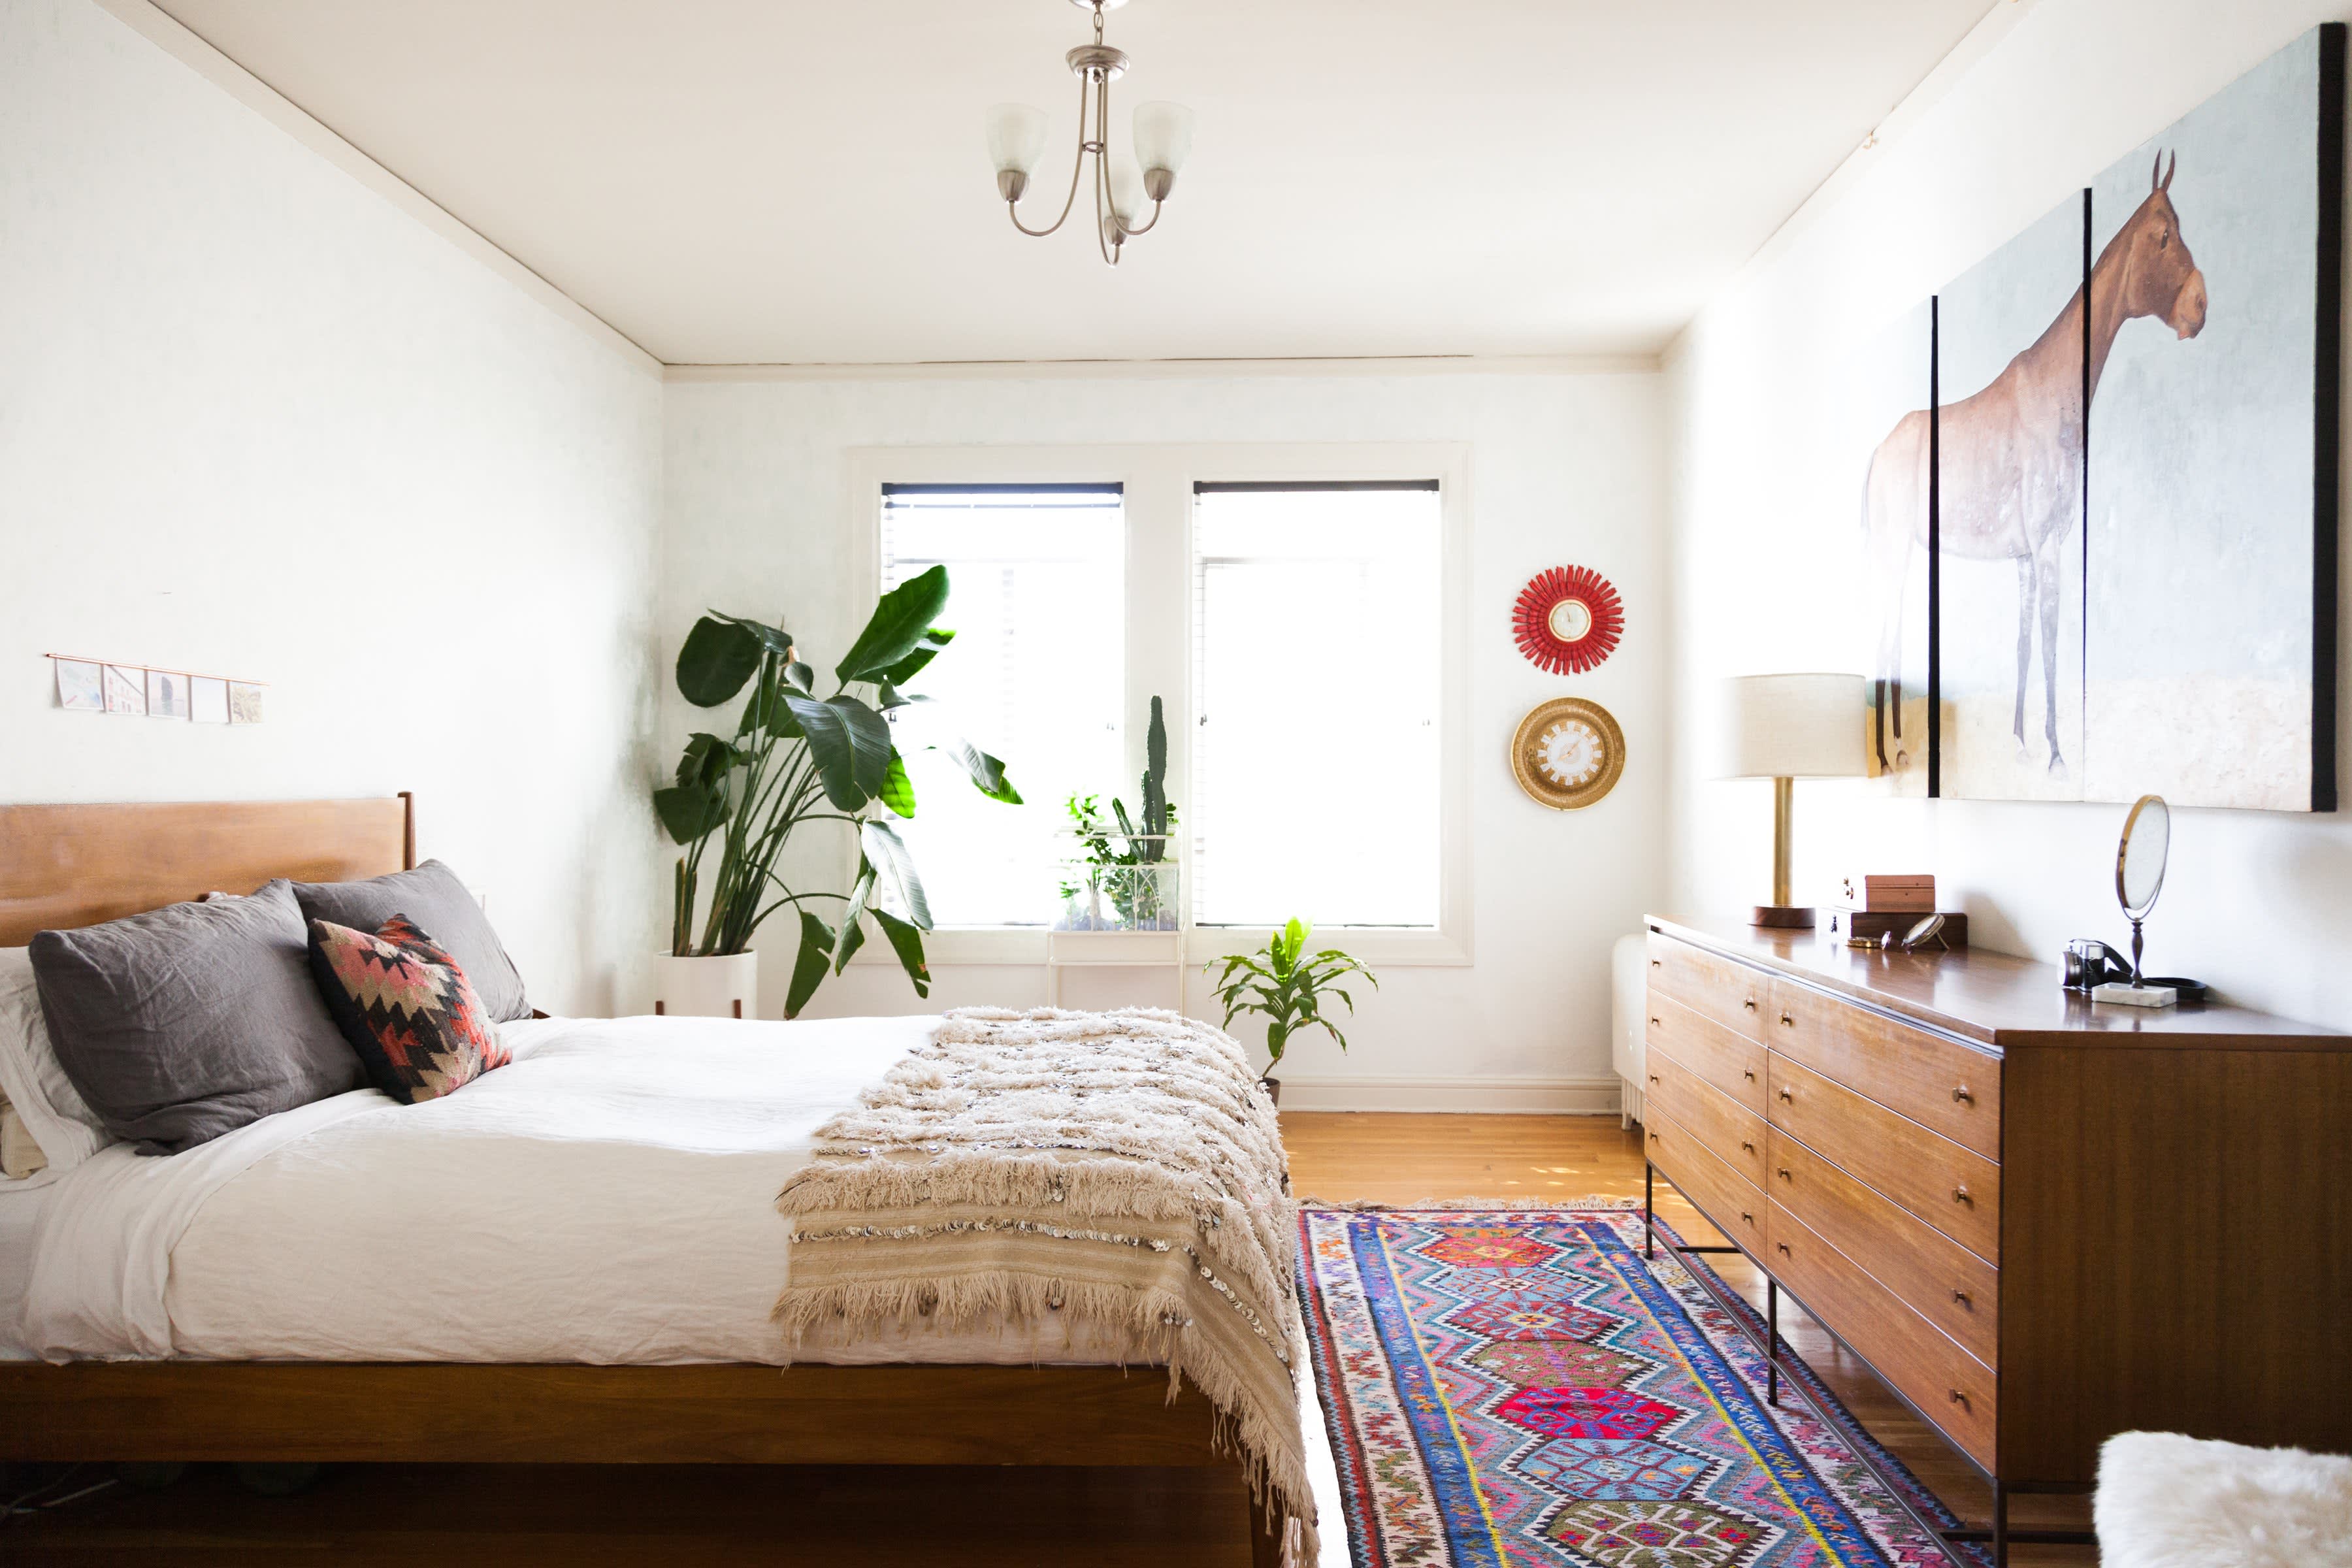 10 inspiring rug layout ideas to help break you out of a bedroom